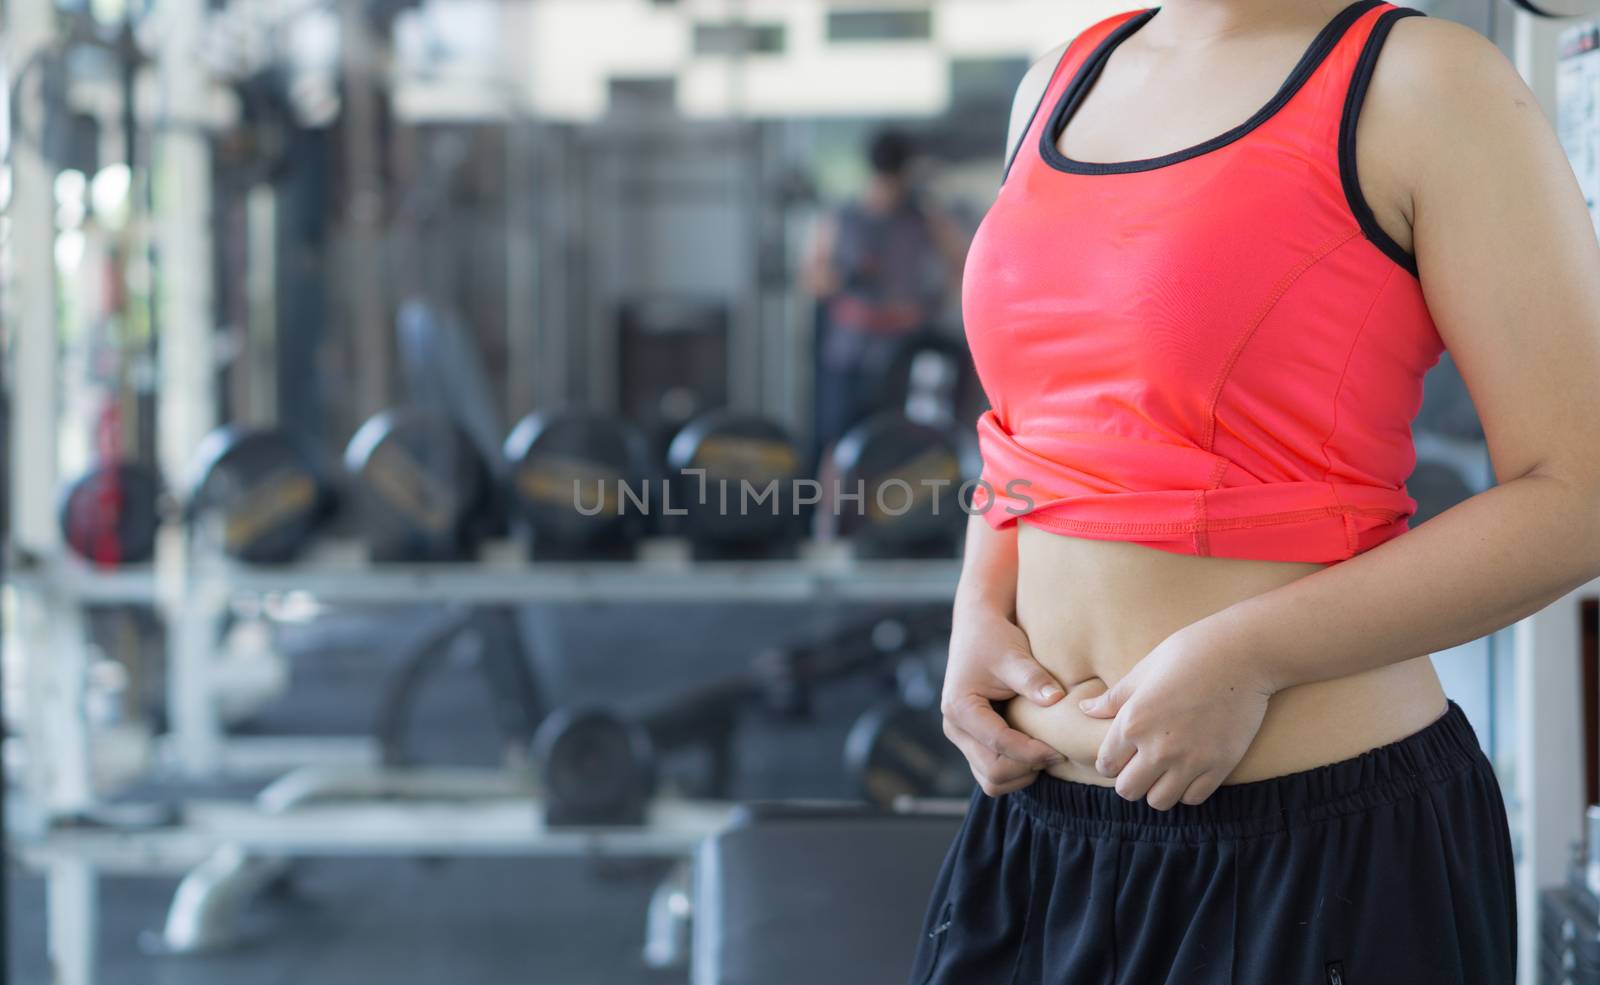 Close up woman holding excessive fat belly. Woman overweight abdomen. Woman diet lifestyle concept reduce belly and shape up healthy stomach muscle. Weight loss, slim body, healthy lifestyle concept.